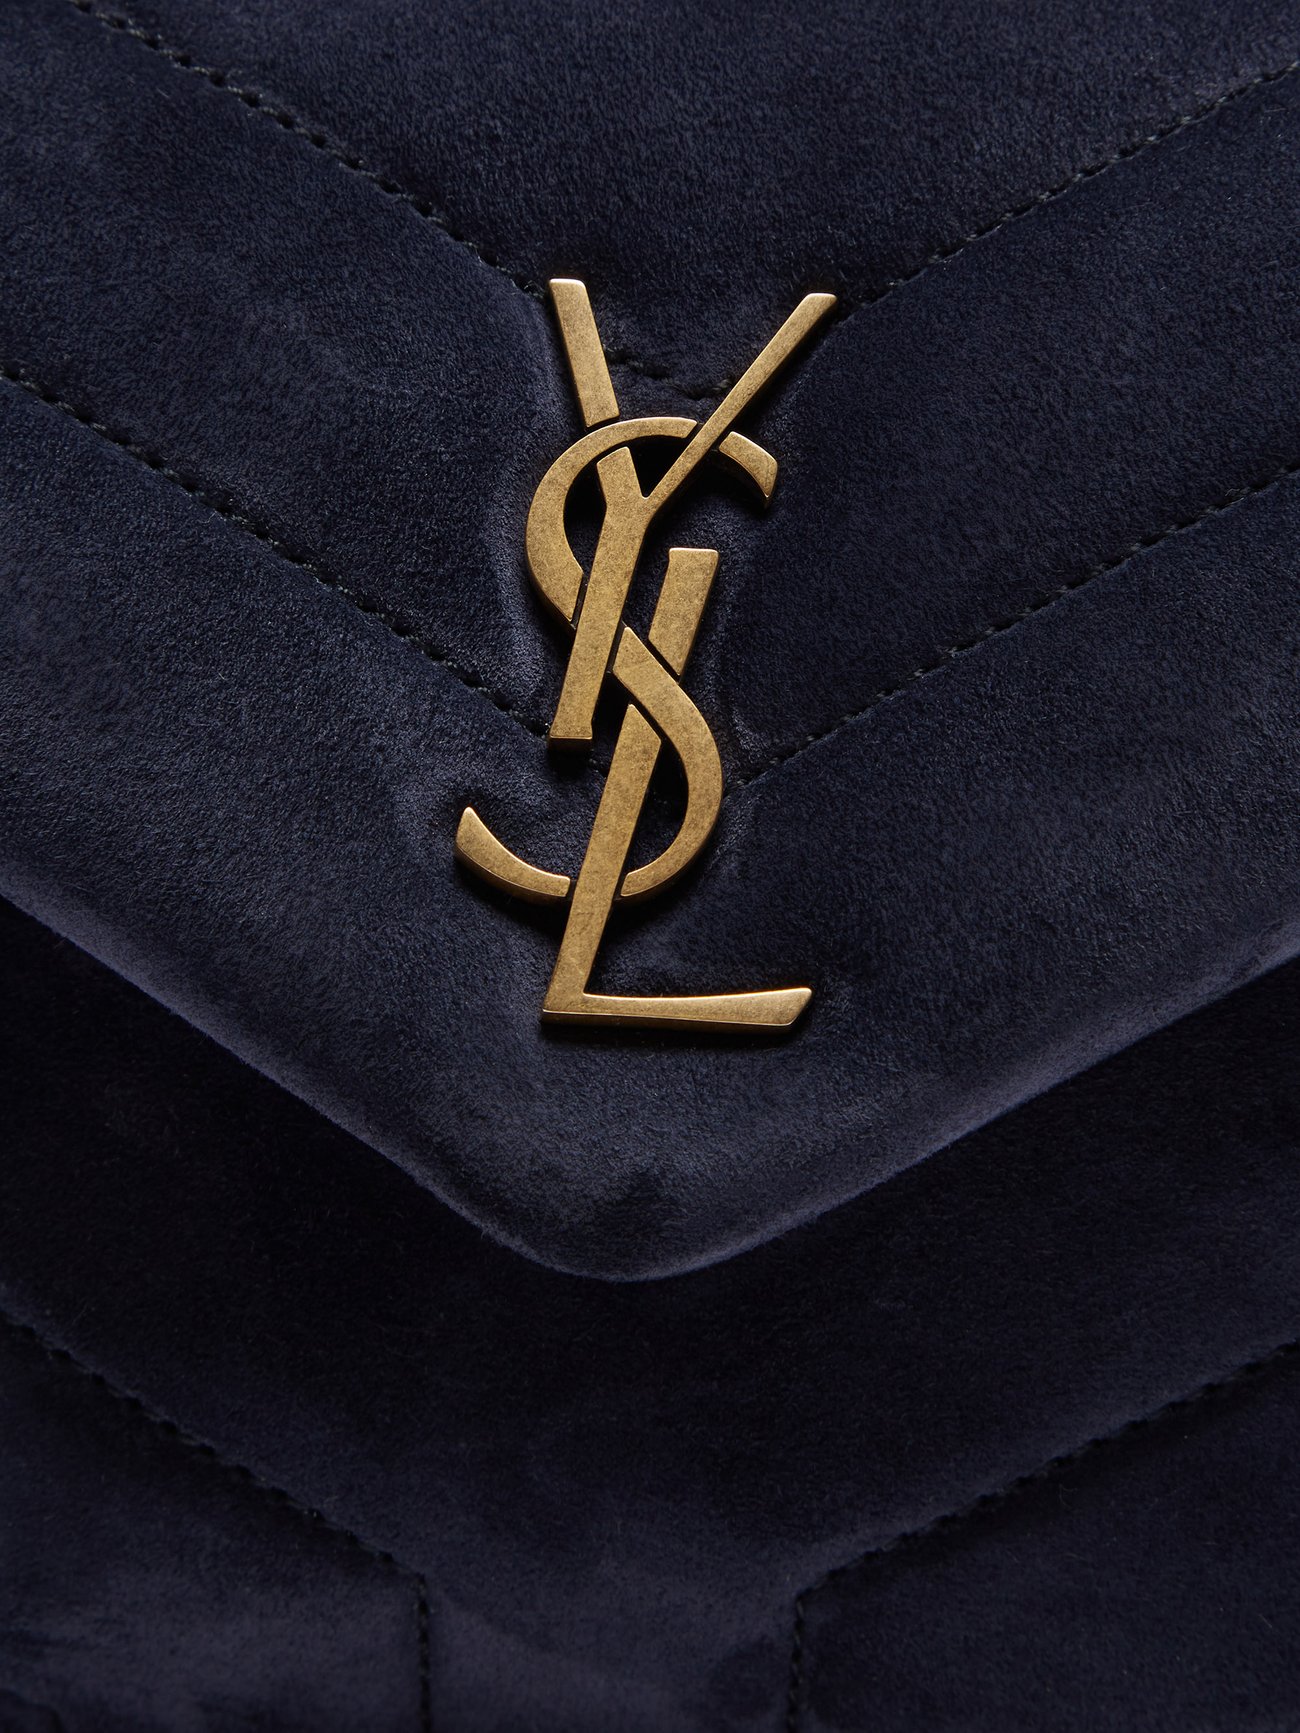 The Navy YSL Toy LouLou - The Haute Finish